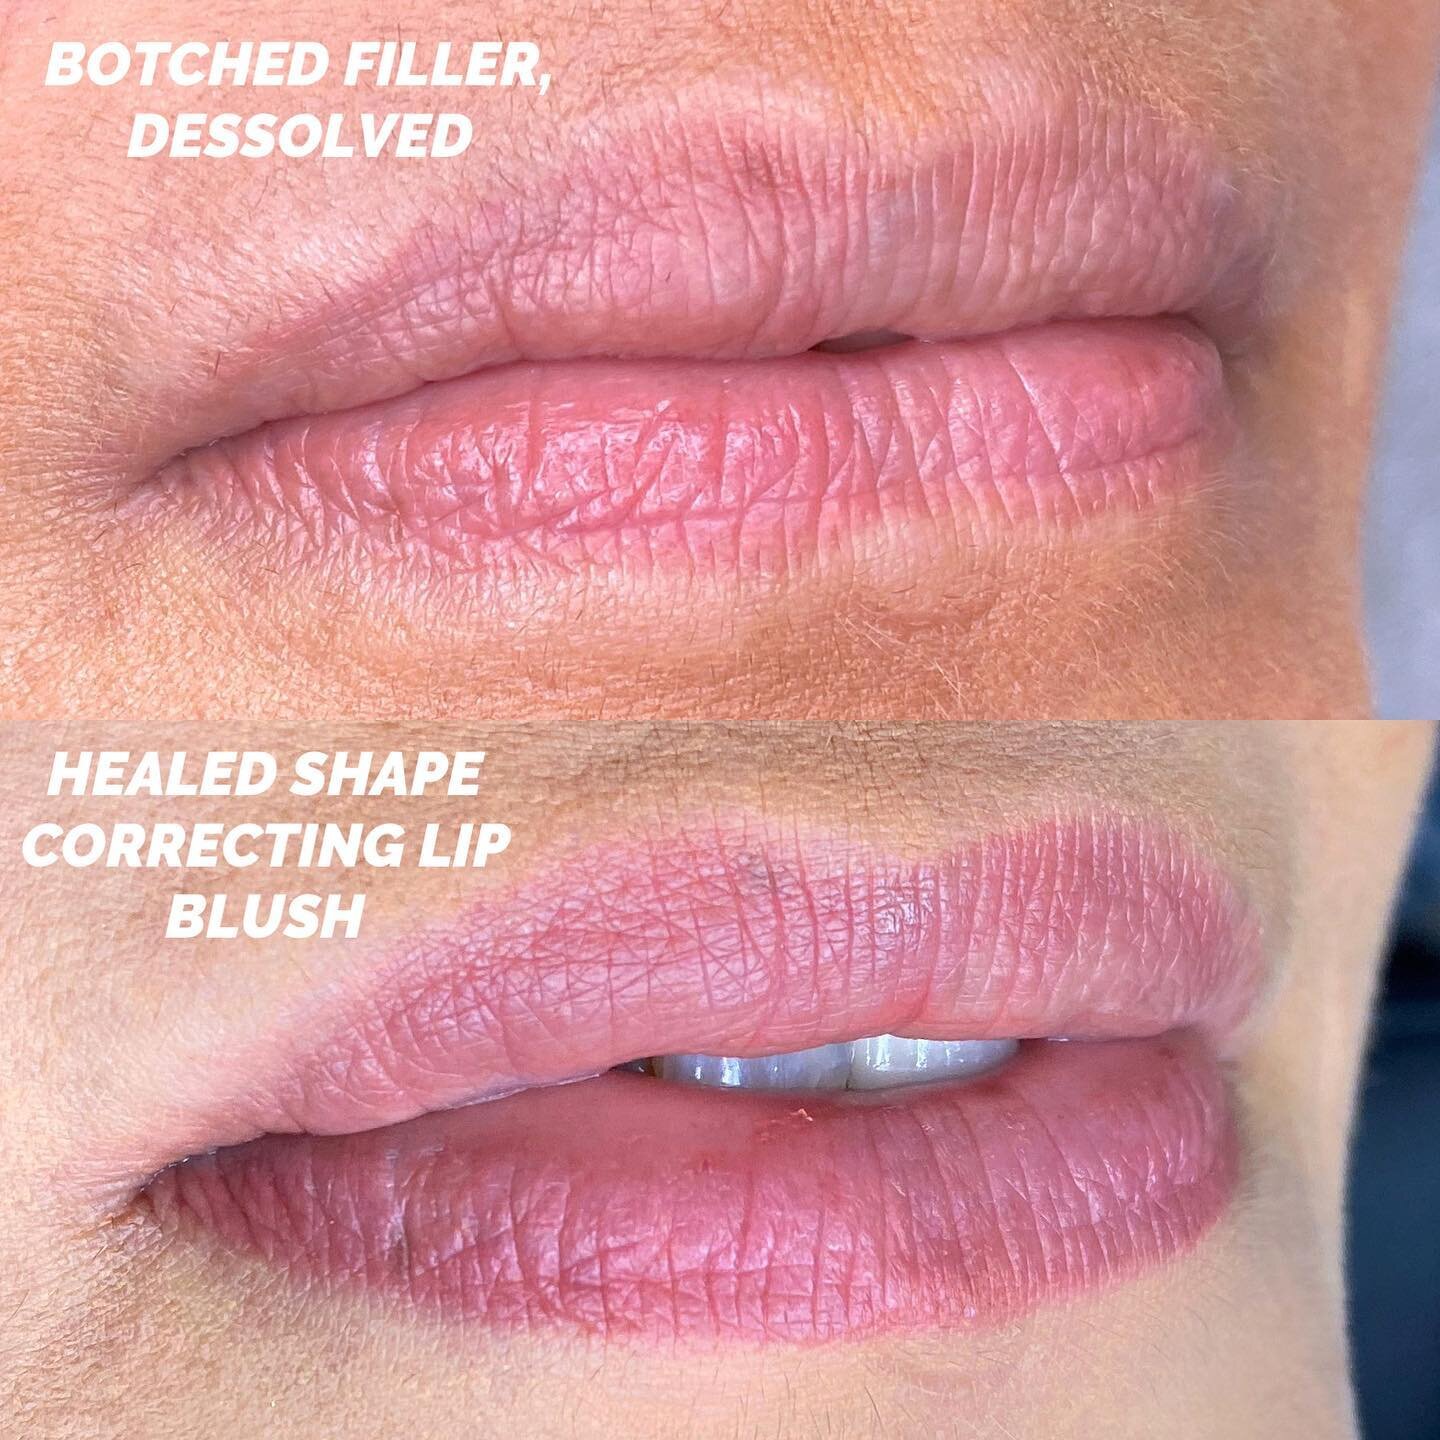 Lip Blush 💋 is a cosmetic tattoo treatment that can be fun, but also so necessary for others 🥹 This client went through a series of incorrect product being injected into her lips. After finally having them dissolved of her mystery botched filler&he